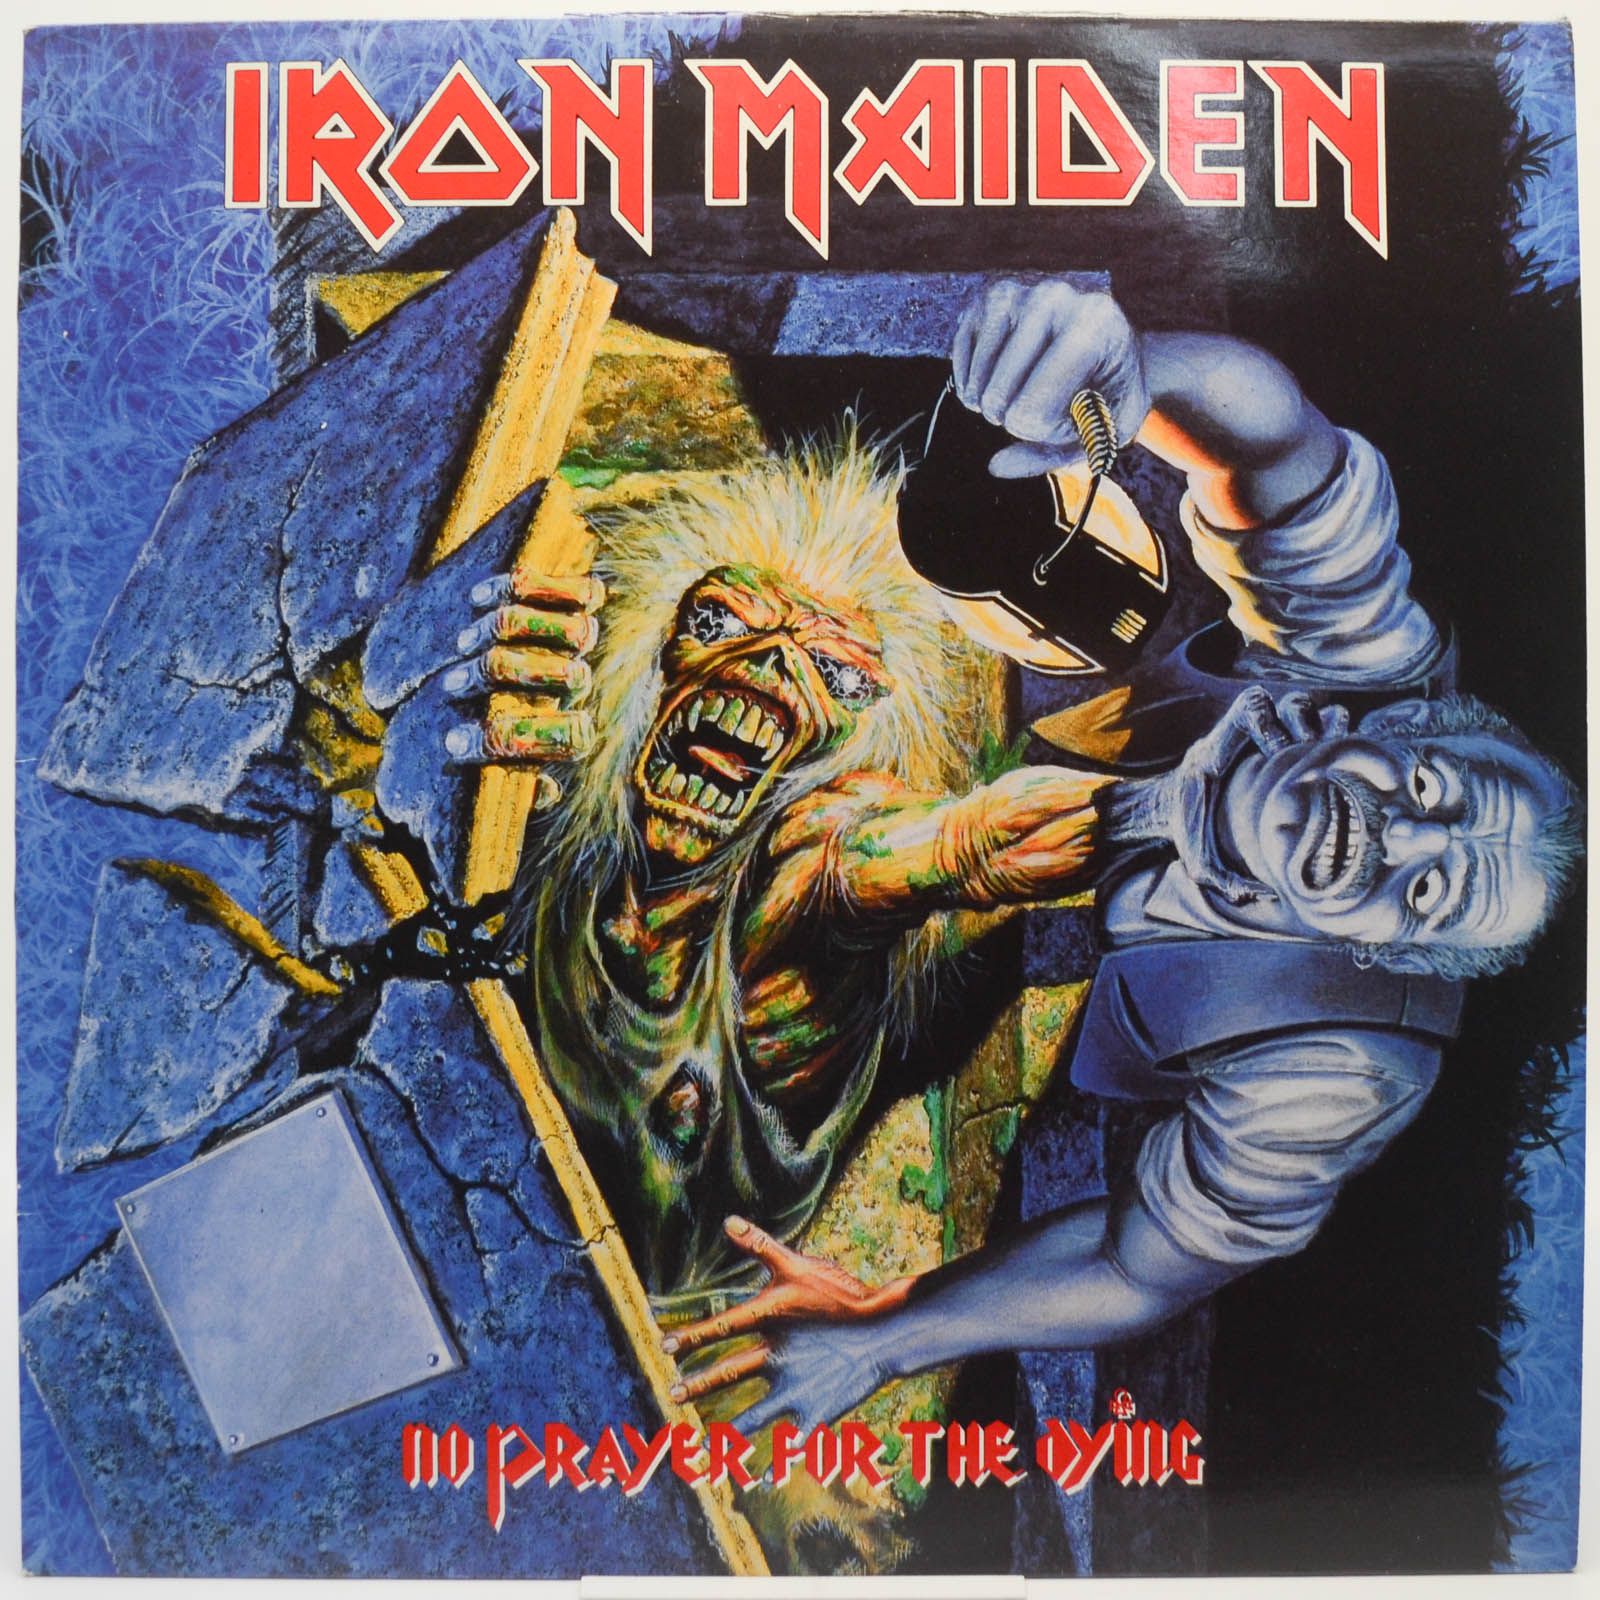 Iron Maiden — No Prayer For The Dying (1-st, UK), 1990